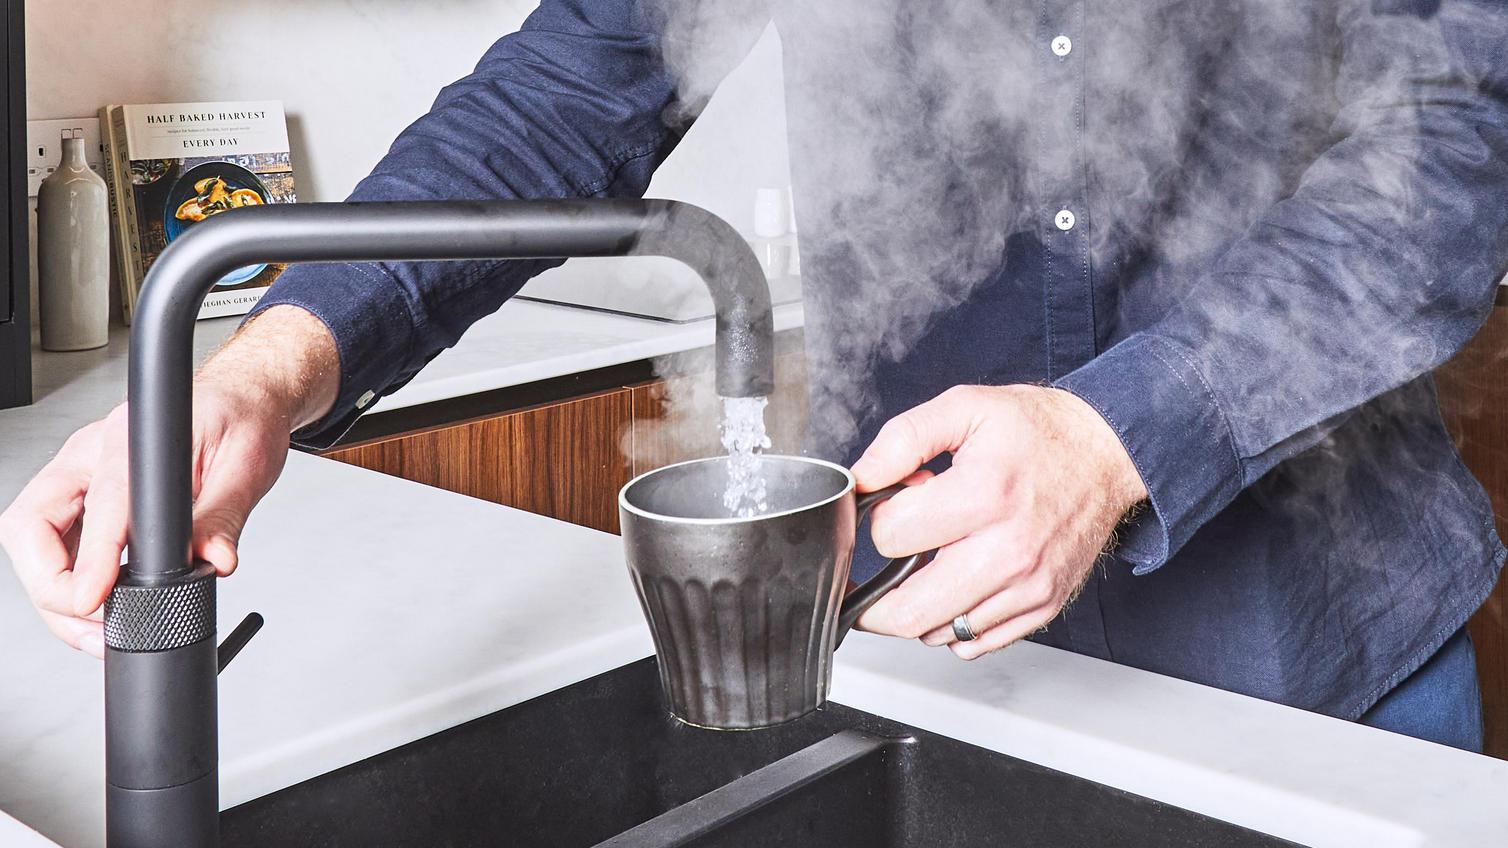 Man in a blue shirt using a boiling water, black tap with an angled spout.